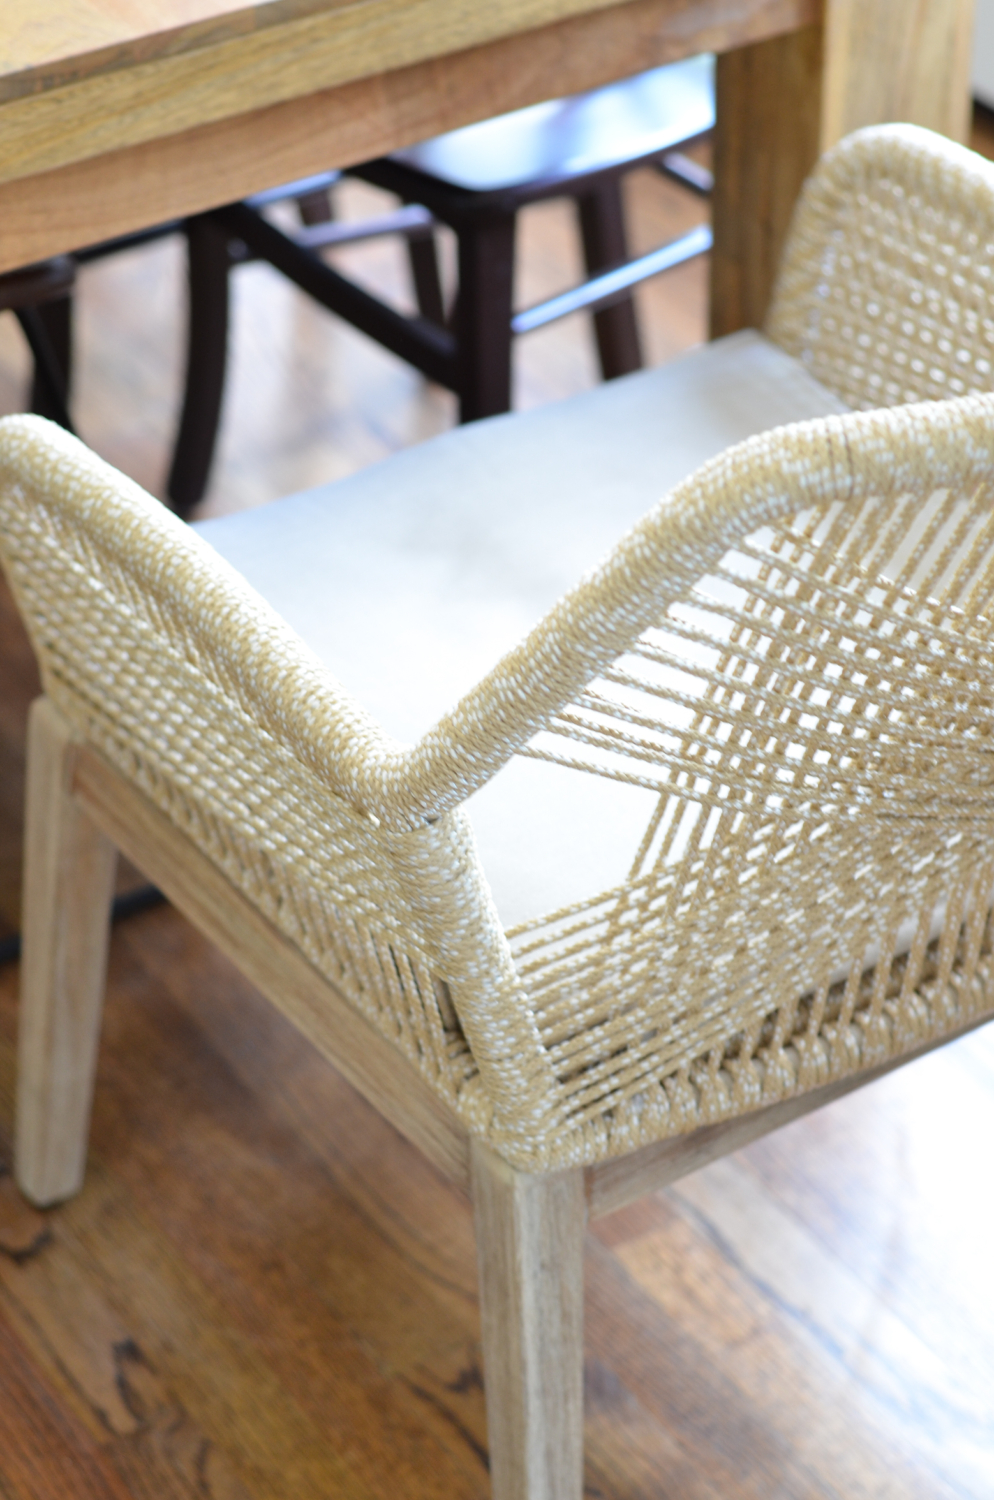 Beige rope chairs are a stunning addition to this chic yet family friendly breakfast nook makeover.